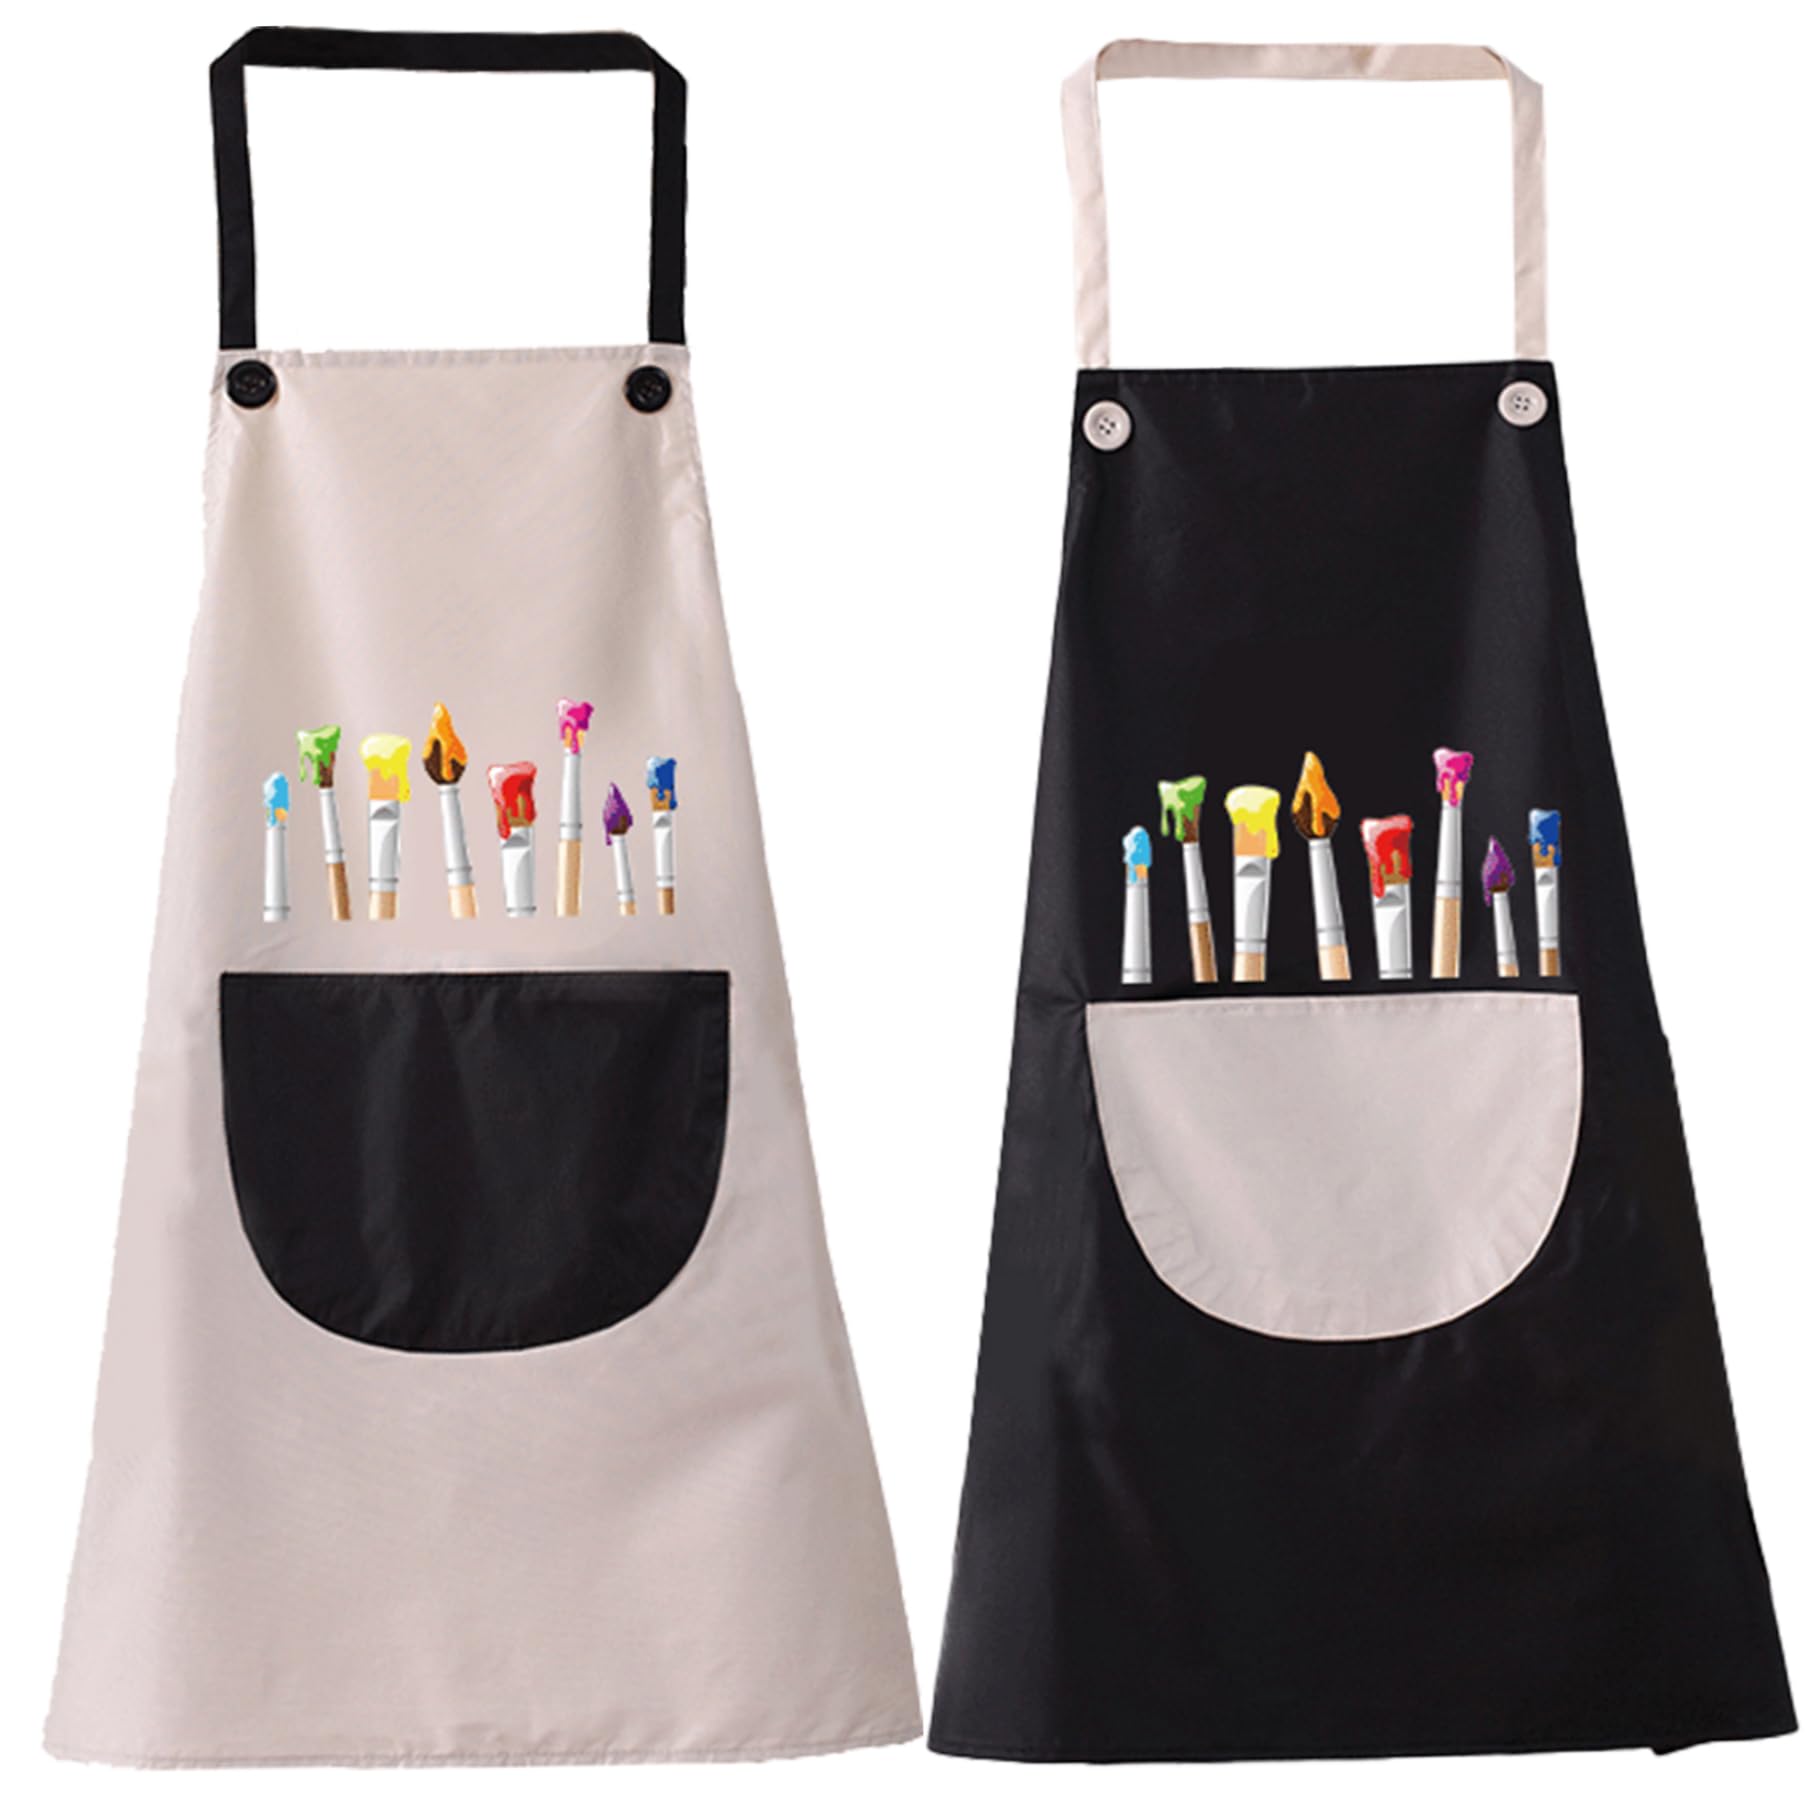 Havamoasa 2Pcs Kids Painting Aprons Kids Apron Waterproof ＆ Oilproof Toddler Art Smock with Roomy Pocket Adjustable Children Play Apron for 9-13 Years Kids Craft, Water Play, Eating